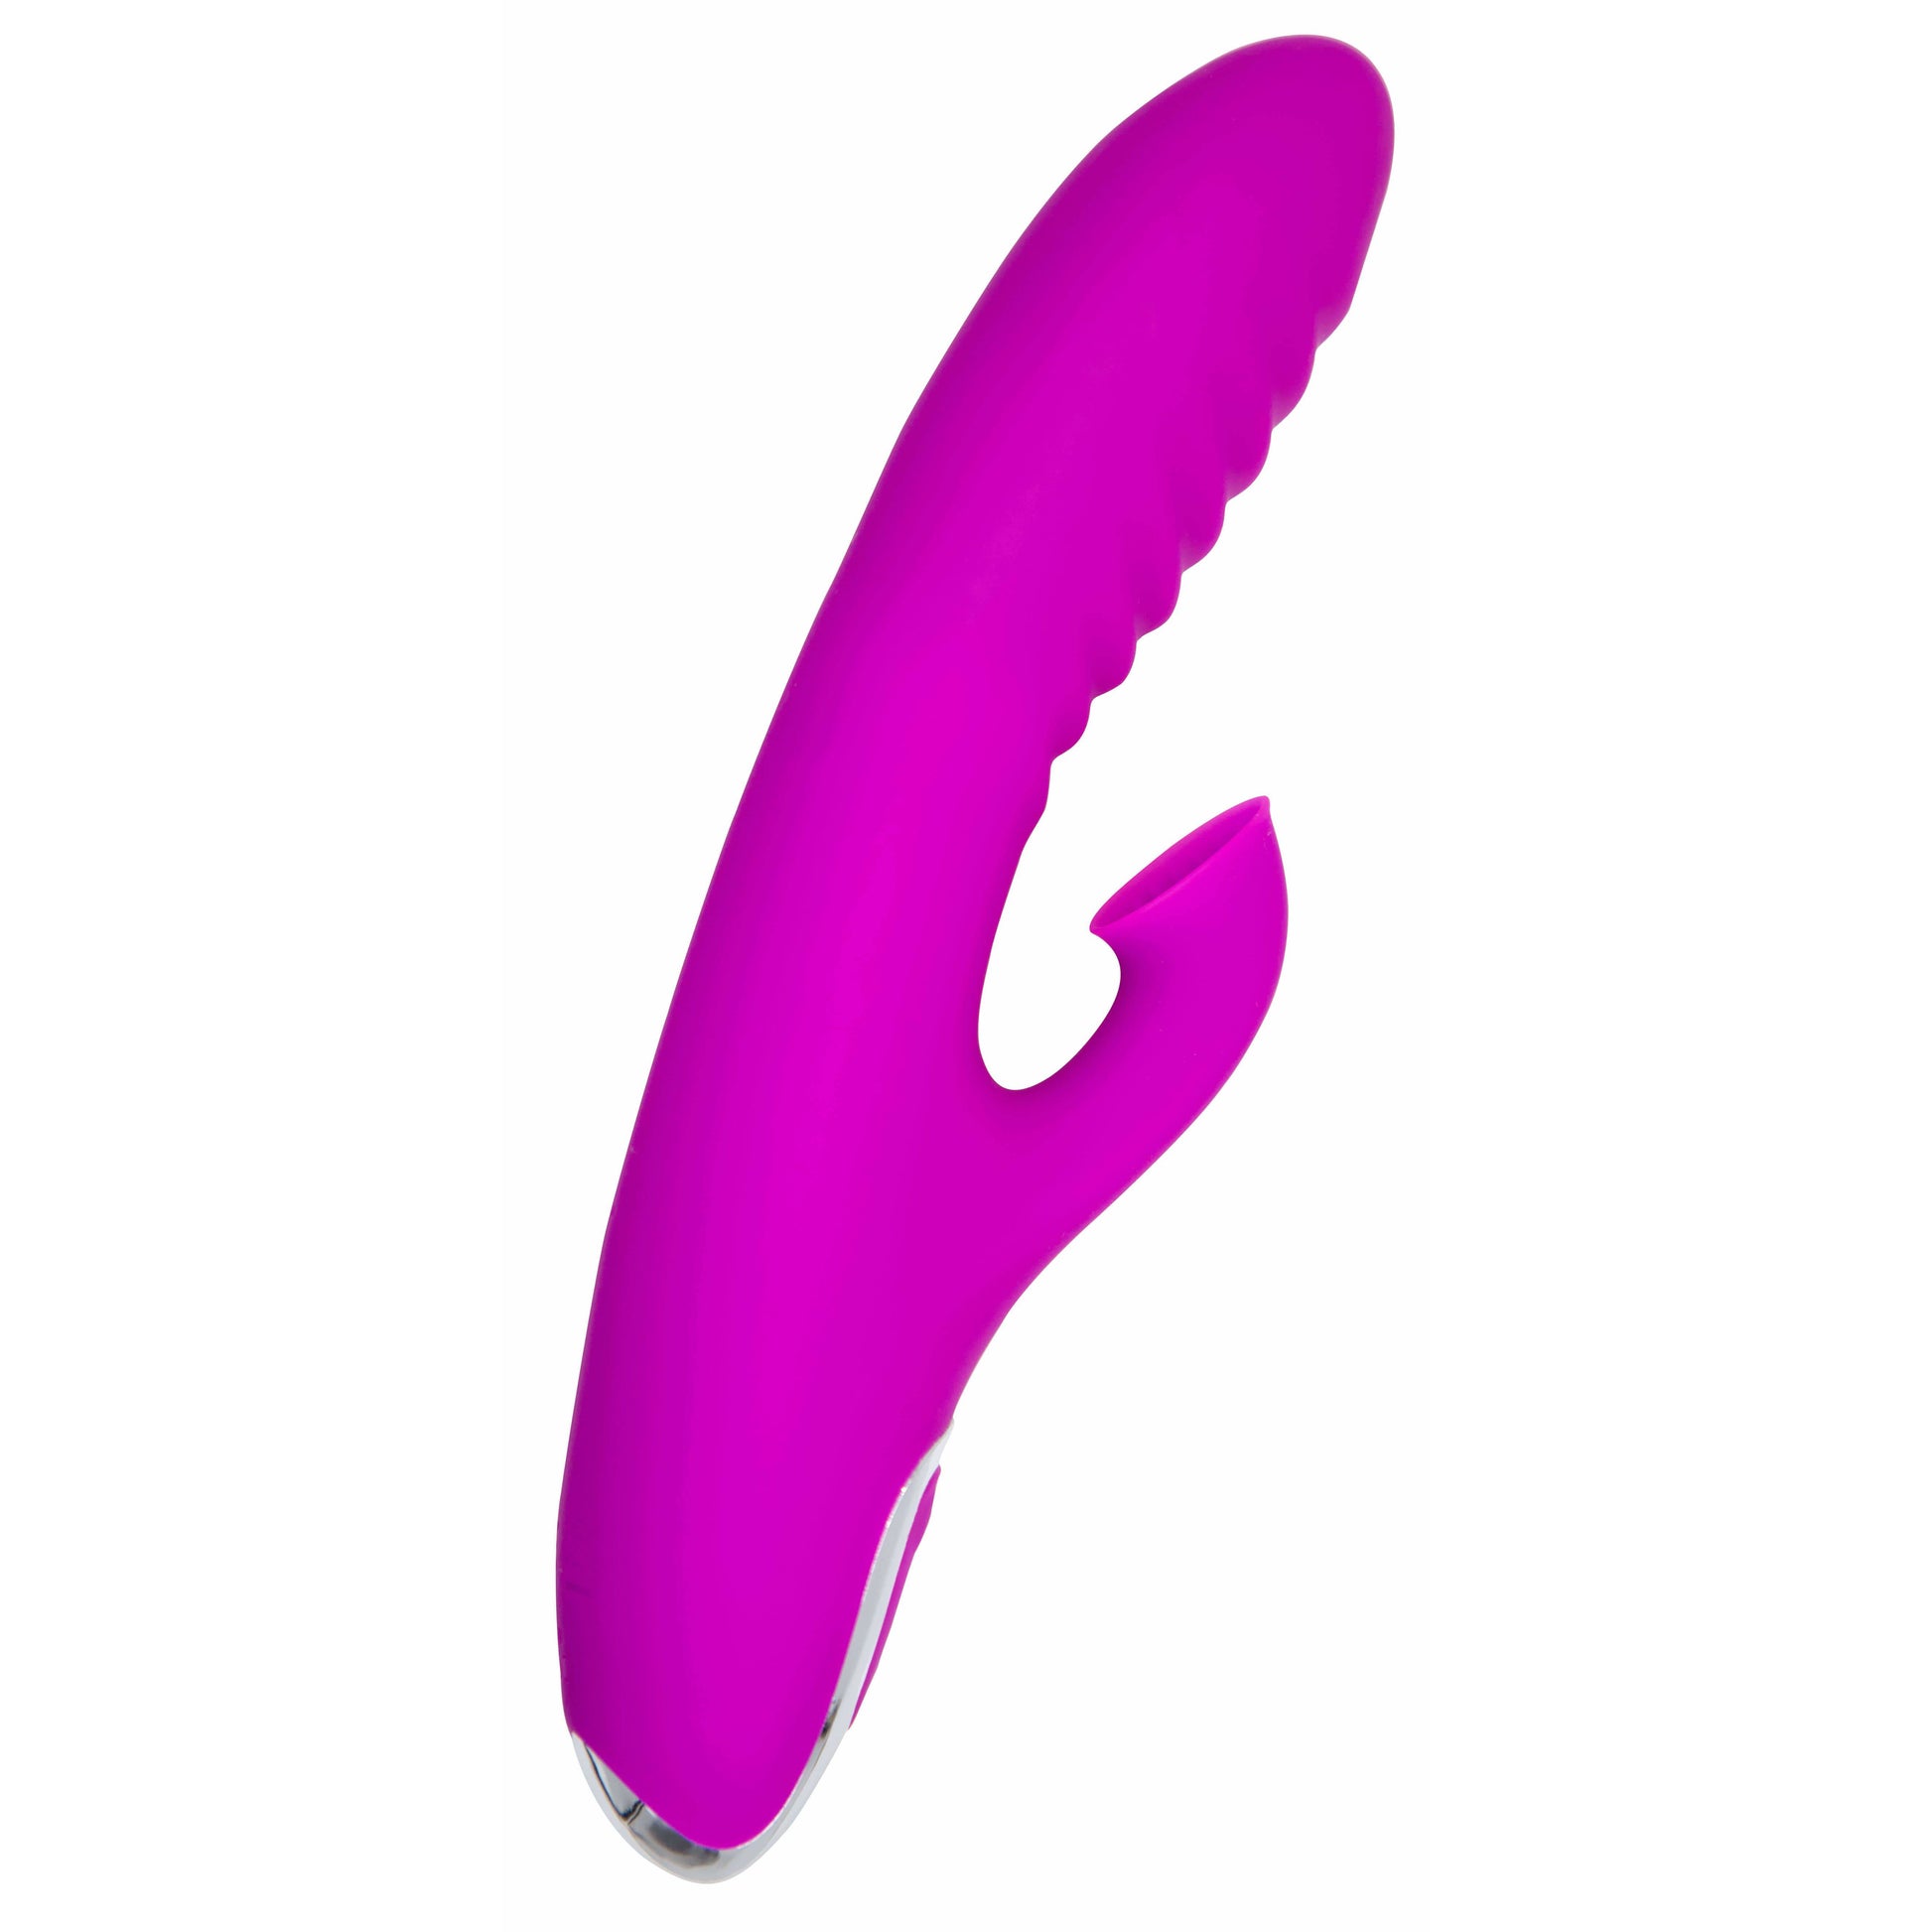 Frenzy Rabbit Vibrator with Clitoral Suction by Viben - The Bigger O - online sex toy shop USA, Canada & UK shipping available